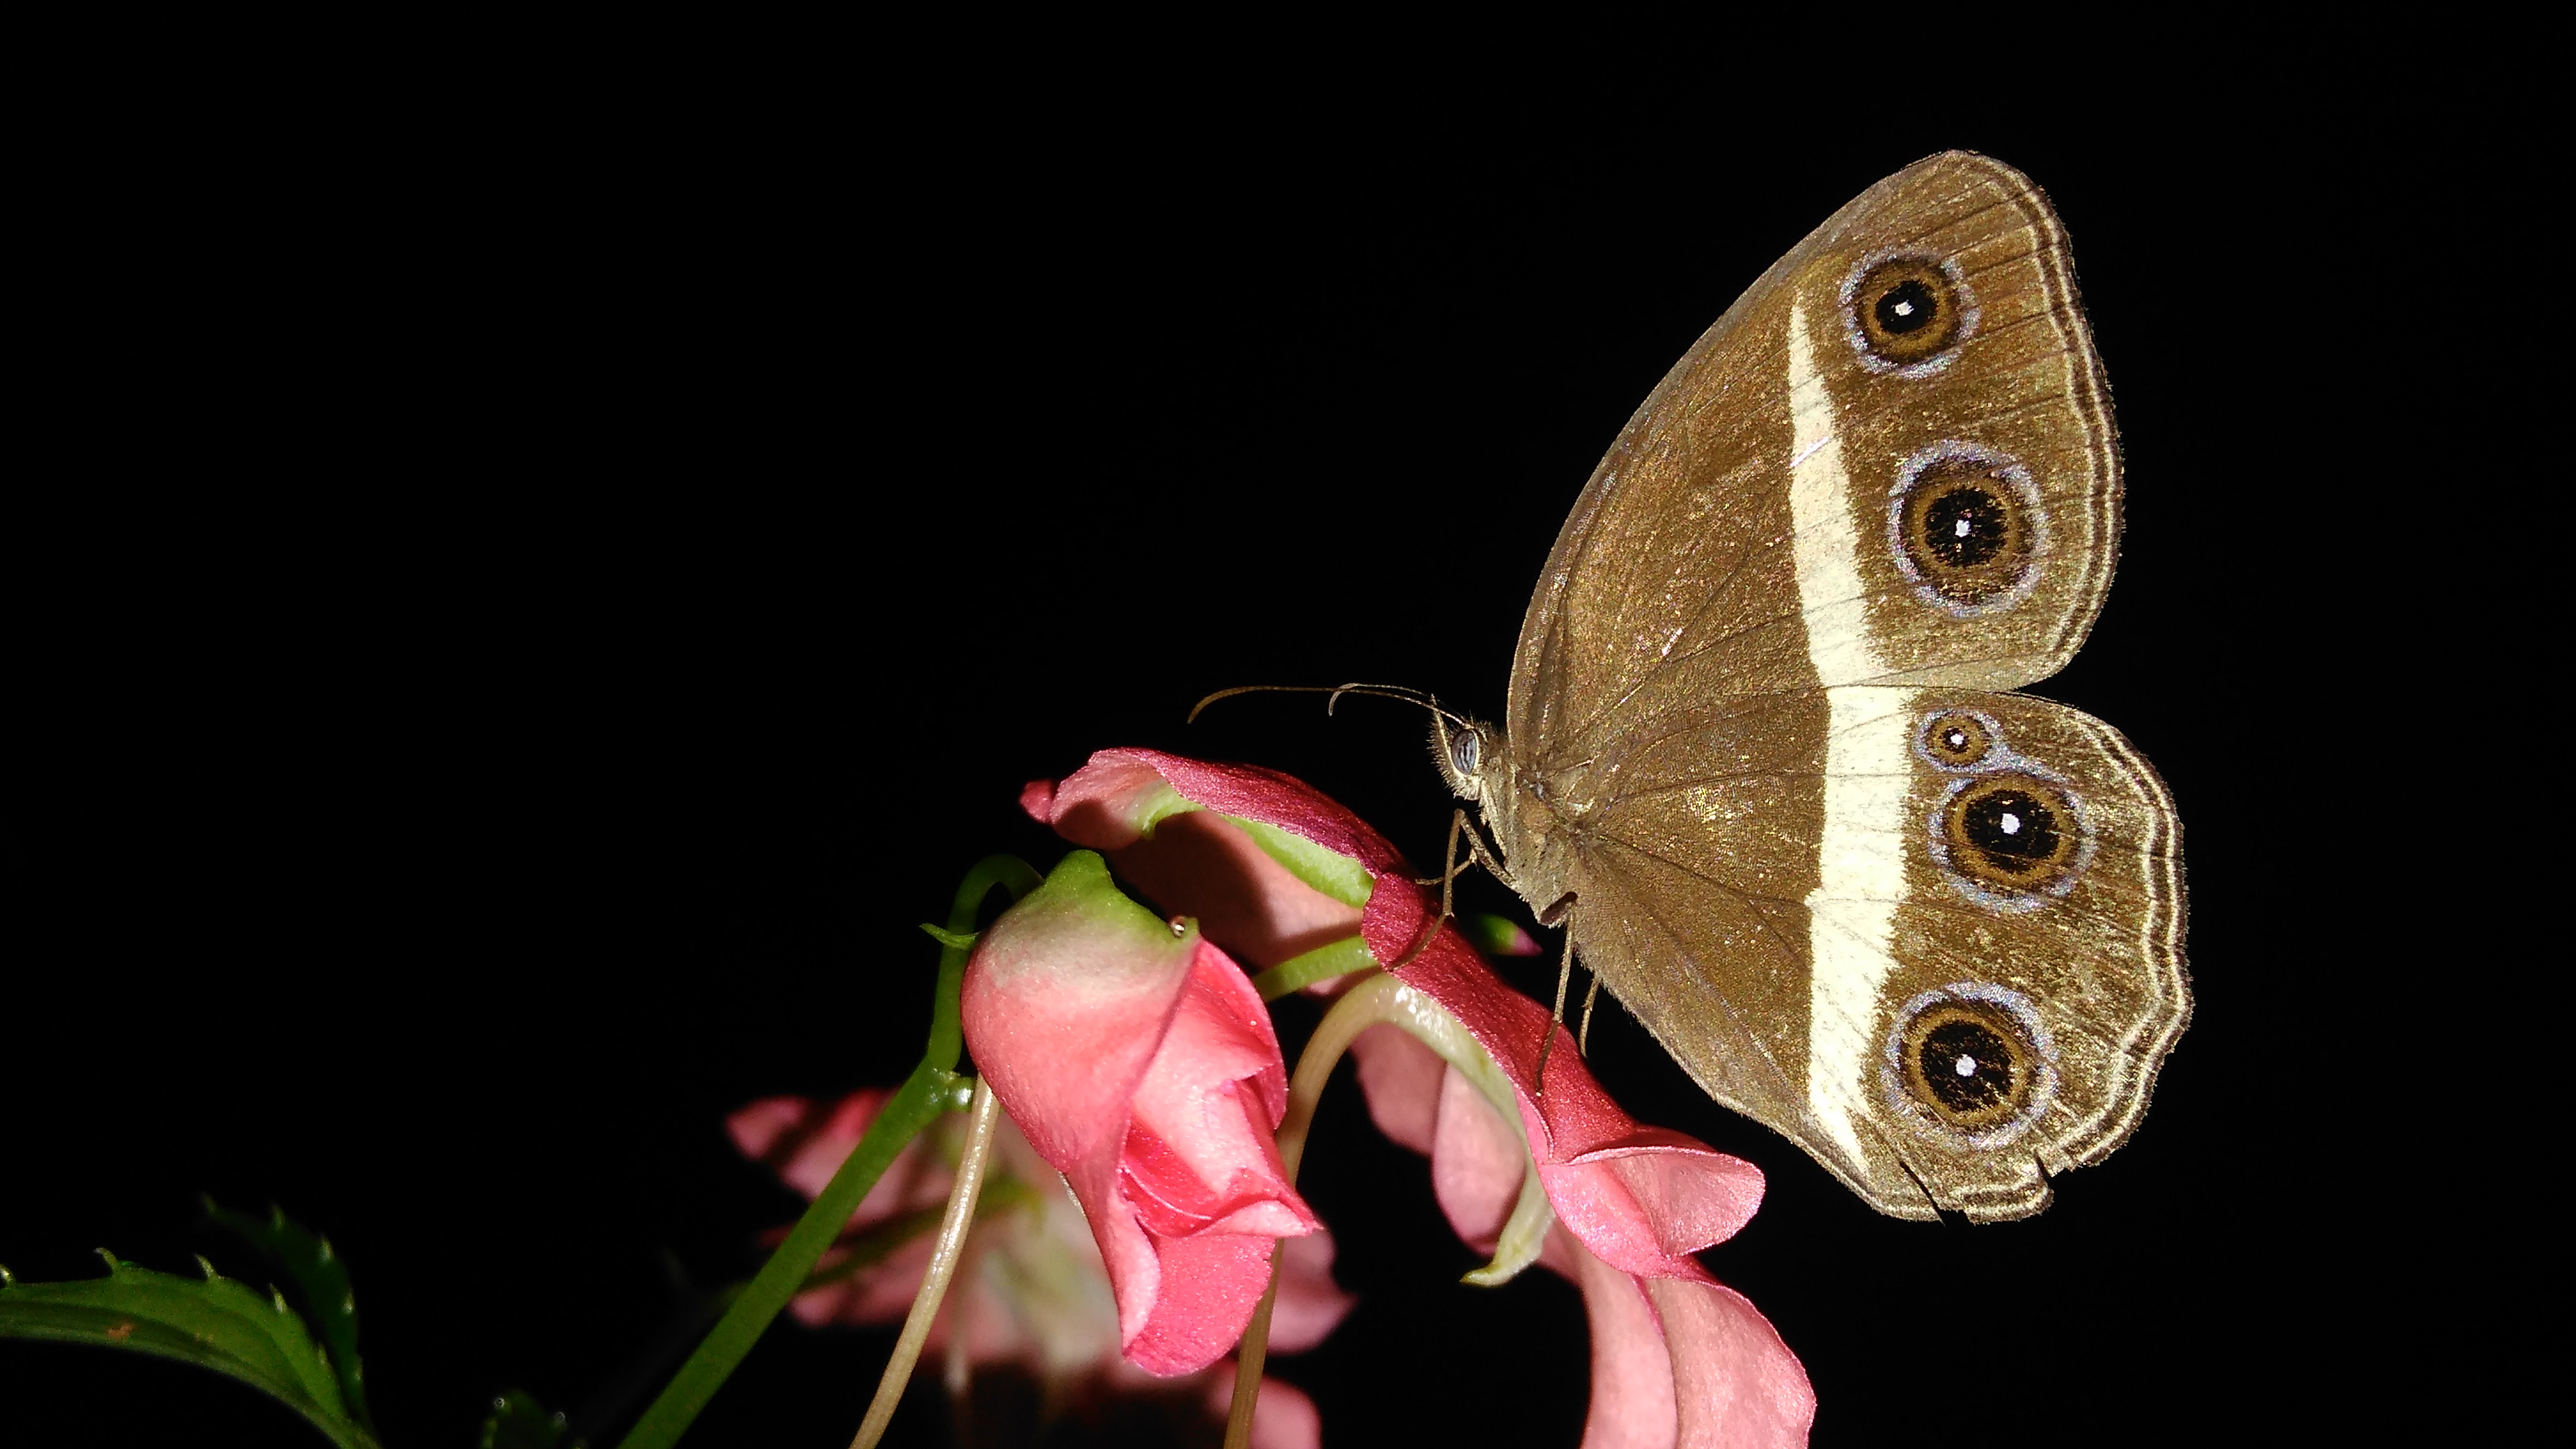 File:Butter fly over a flower, Butterfly hd images, flower hd images ...